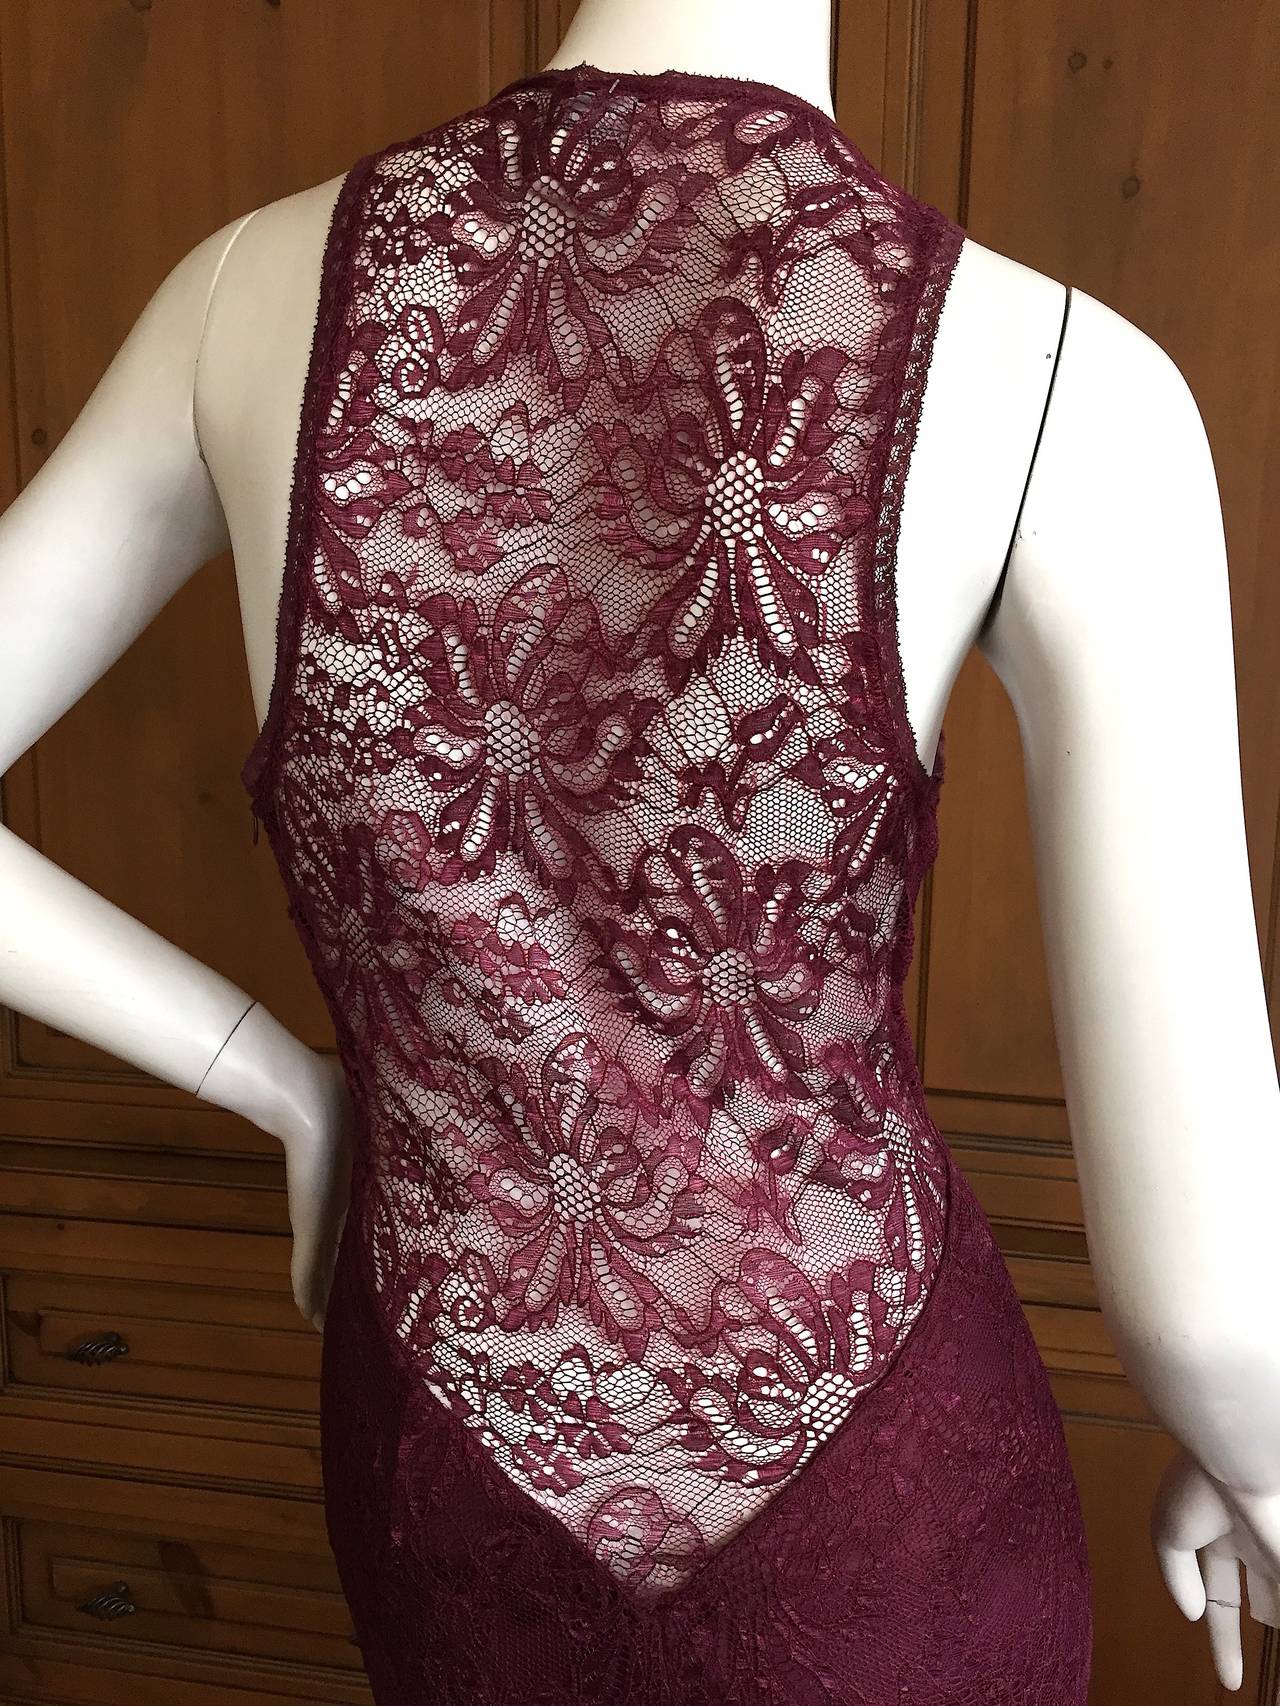 D&G by Dolce & Gabbana Vintage Sexy Sheer Lace Dress .
D&G was the younger, edgier line, and this beauty is classic sexy D&G.
Purple sheer lace, sooooo pretty.
Size 40 (runs small)
Bust 36